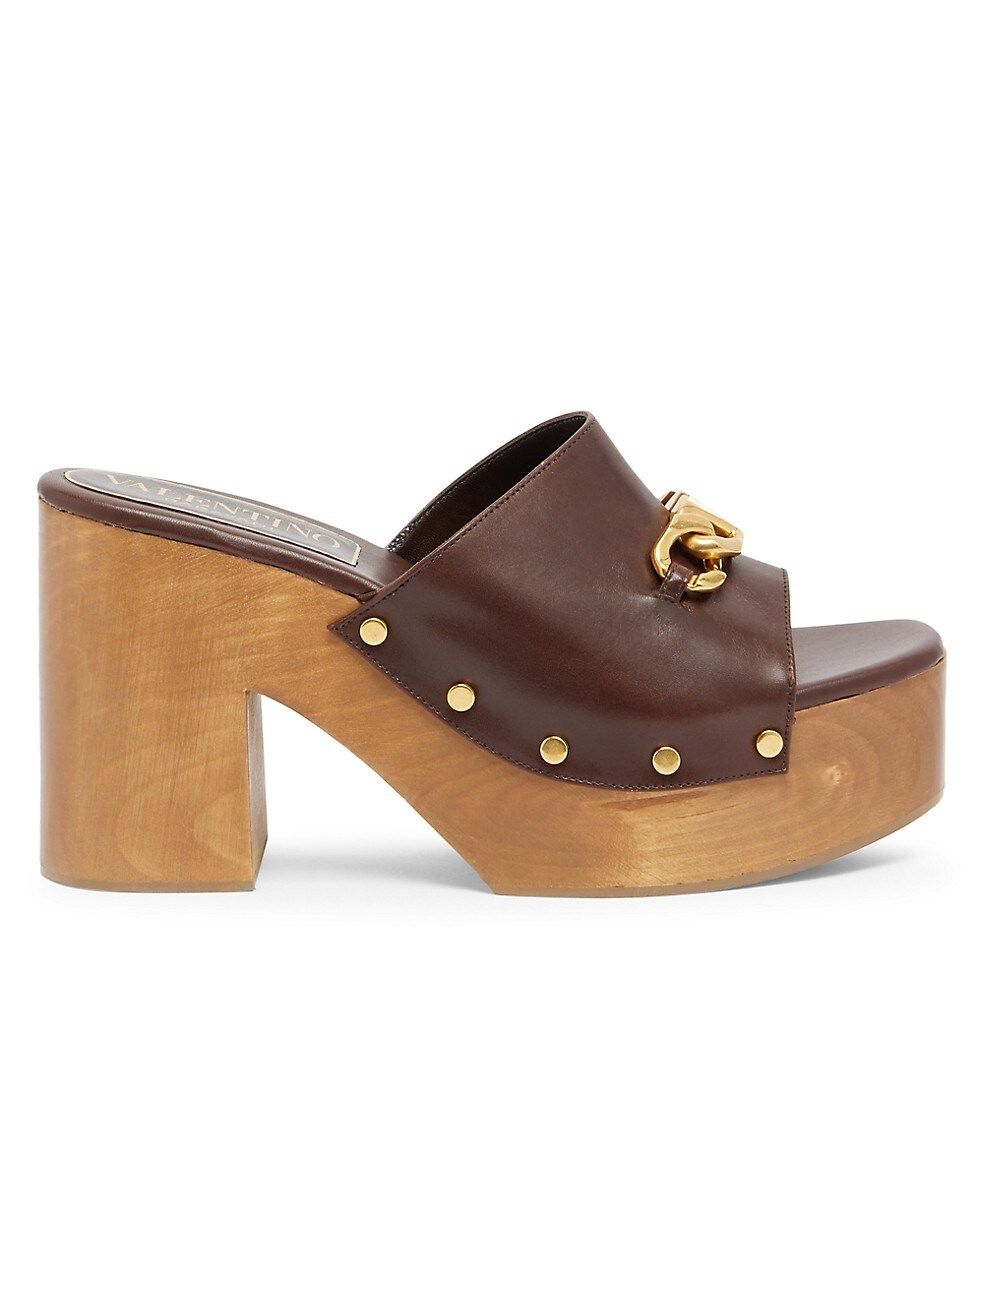 VLogo Chain Leather Clogs | Saks Fifth Avenue